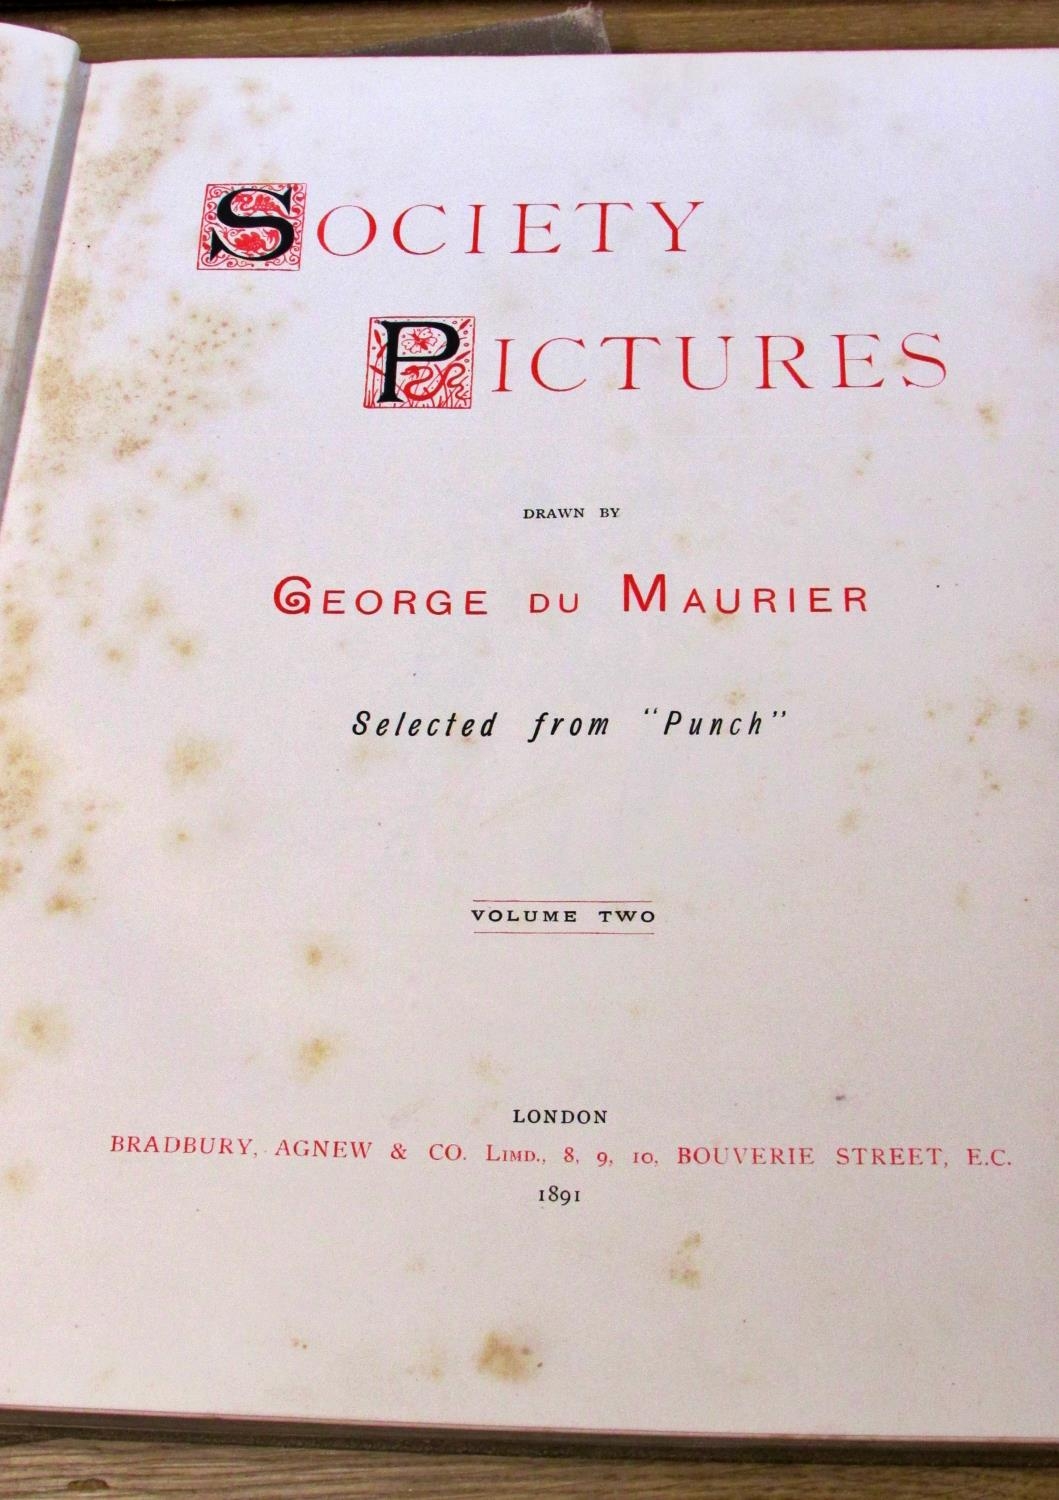 Art & illustration interest - The Modern School of Art, 2 volumes of Punch's Society Pictures (